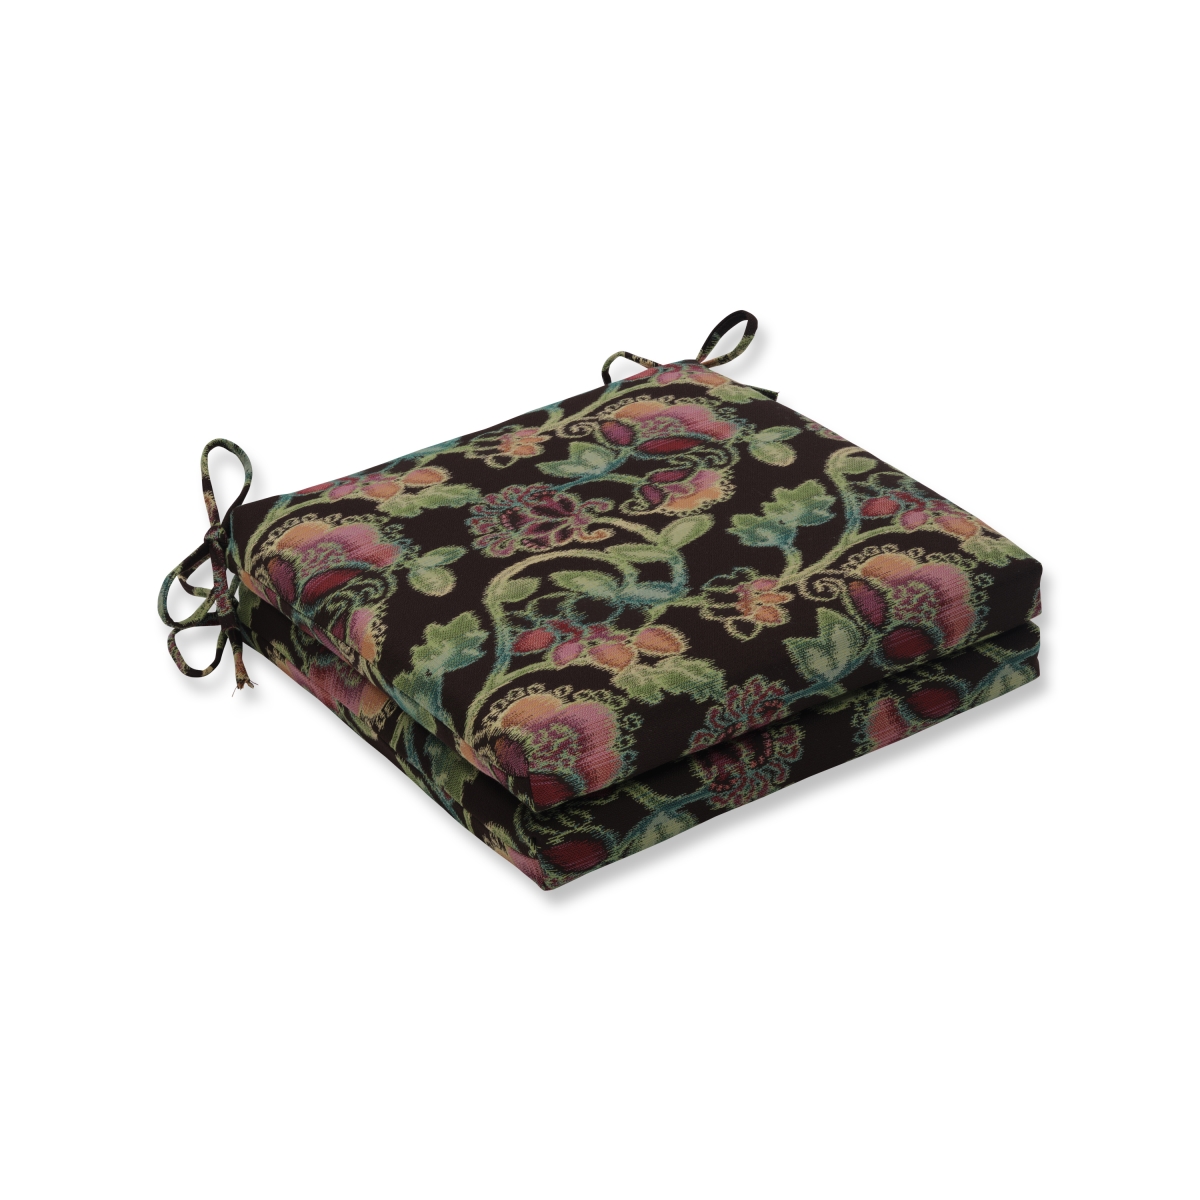 20 X 20 X 3 In. Outdoor & Indoor Vagabond Paradise Squared Corners Seat Cushion, Brown - Set Of 2